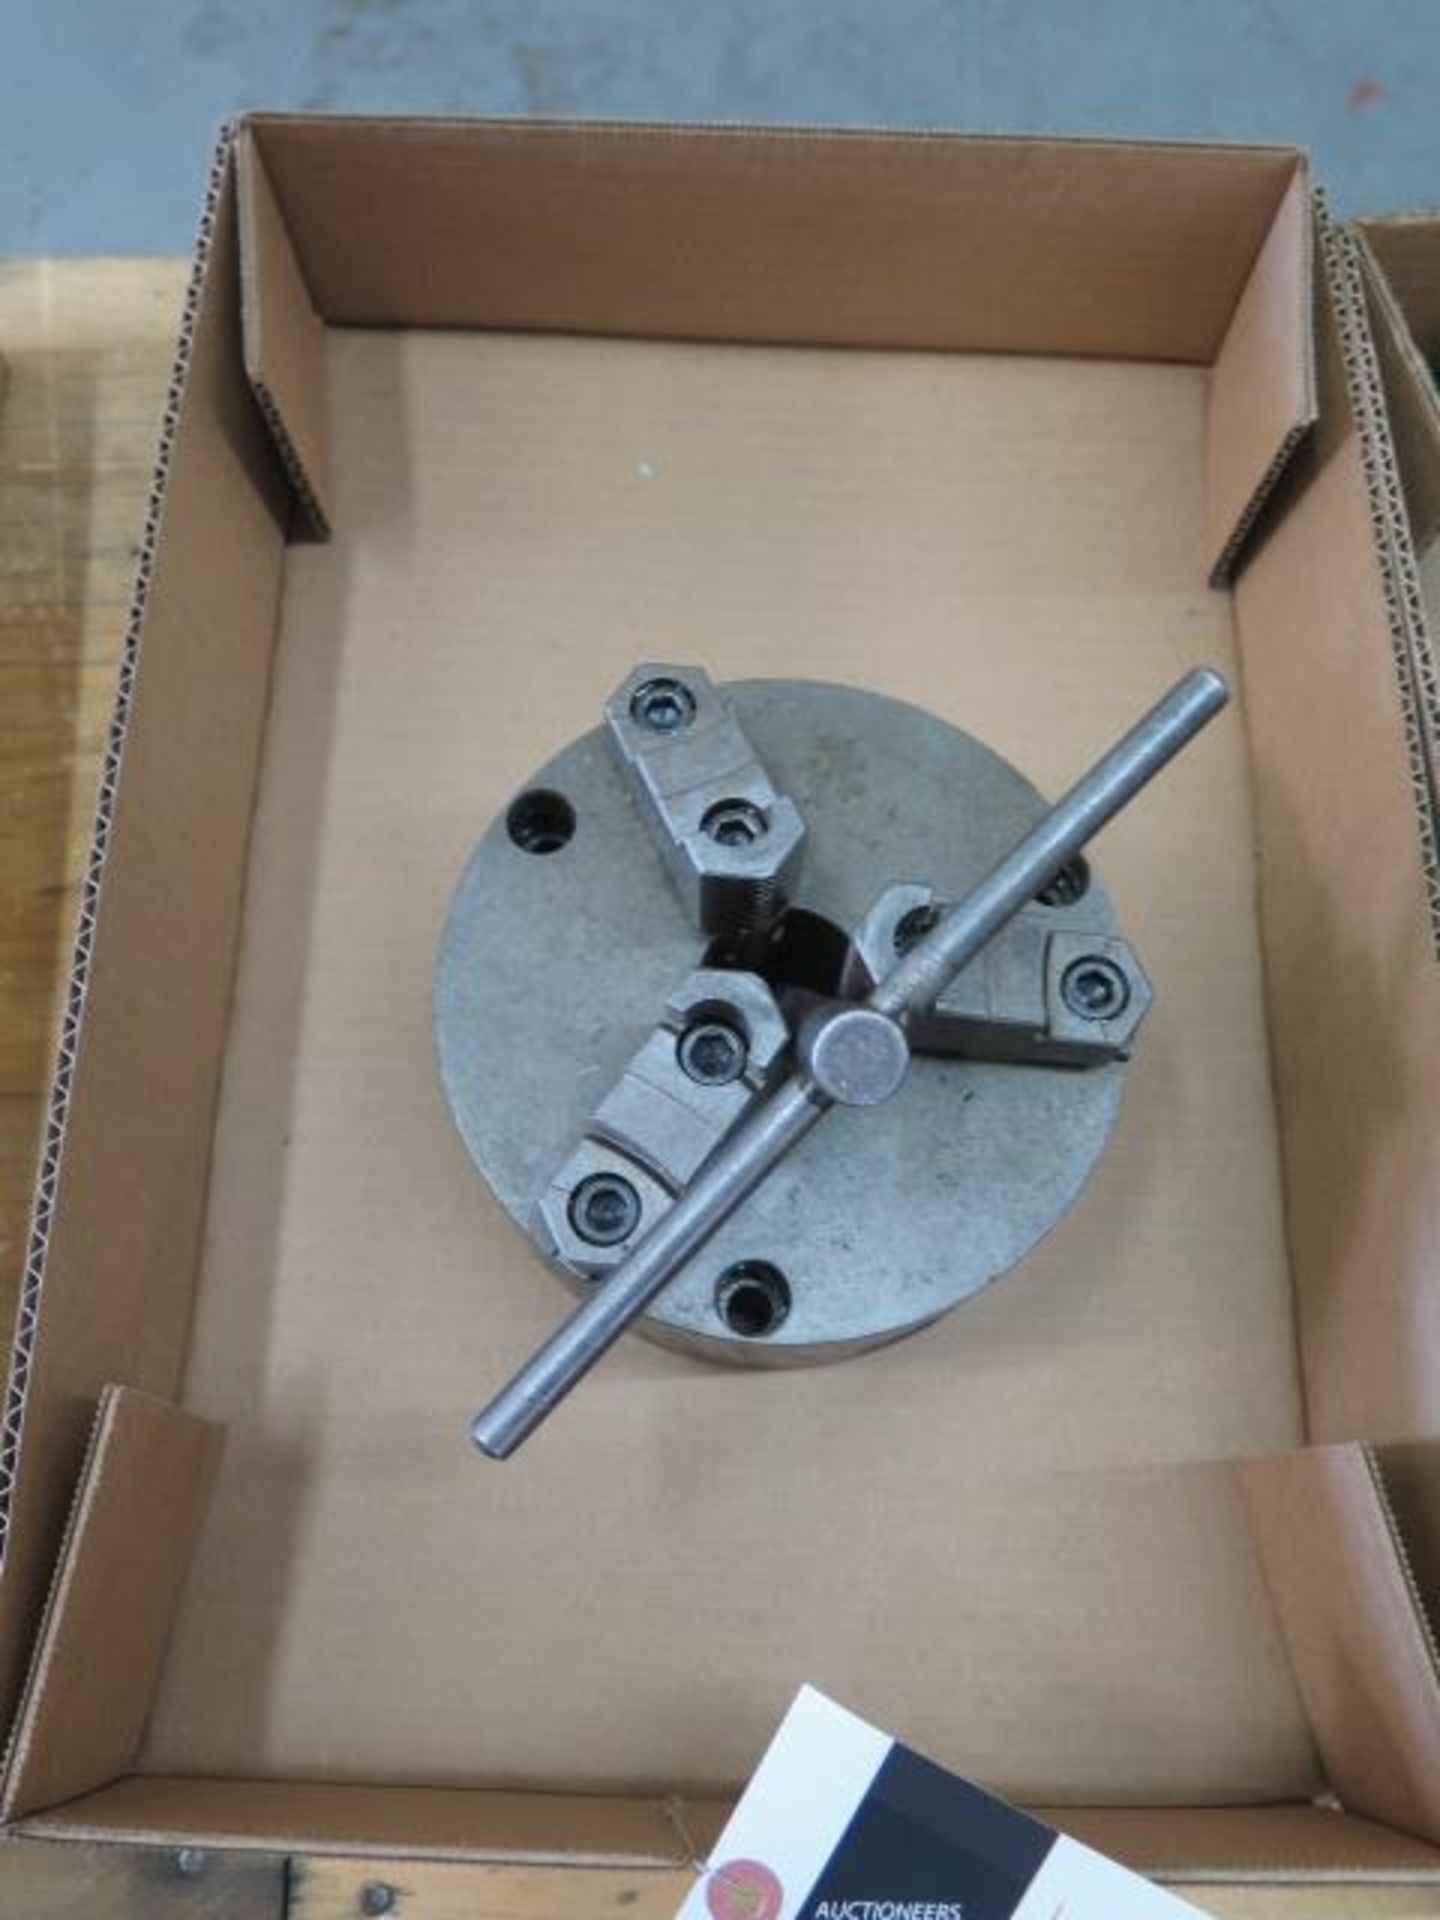 6" 3-Jaw Chuck (SOLD AS-IS - NO WARRANTY) - Image 2 of 3